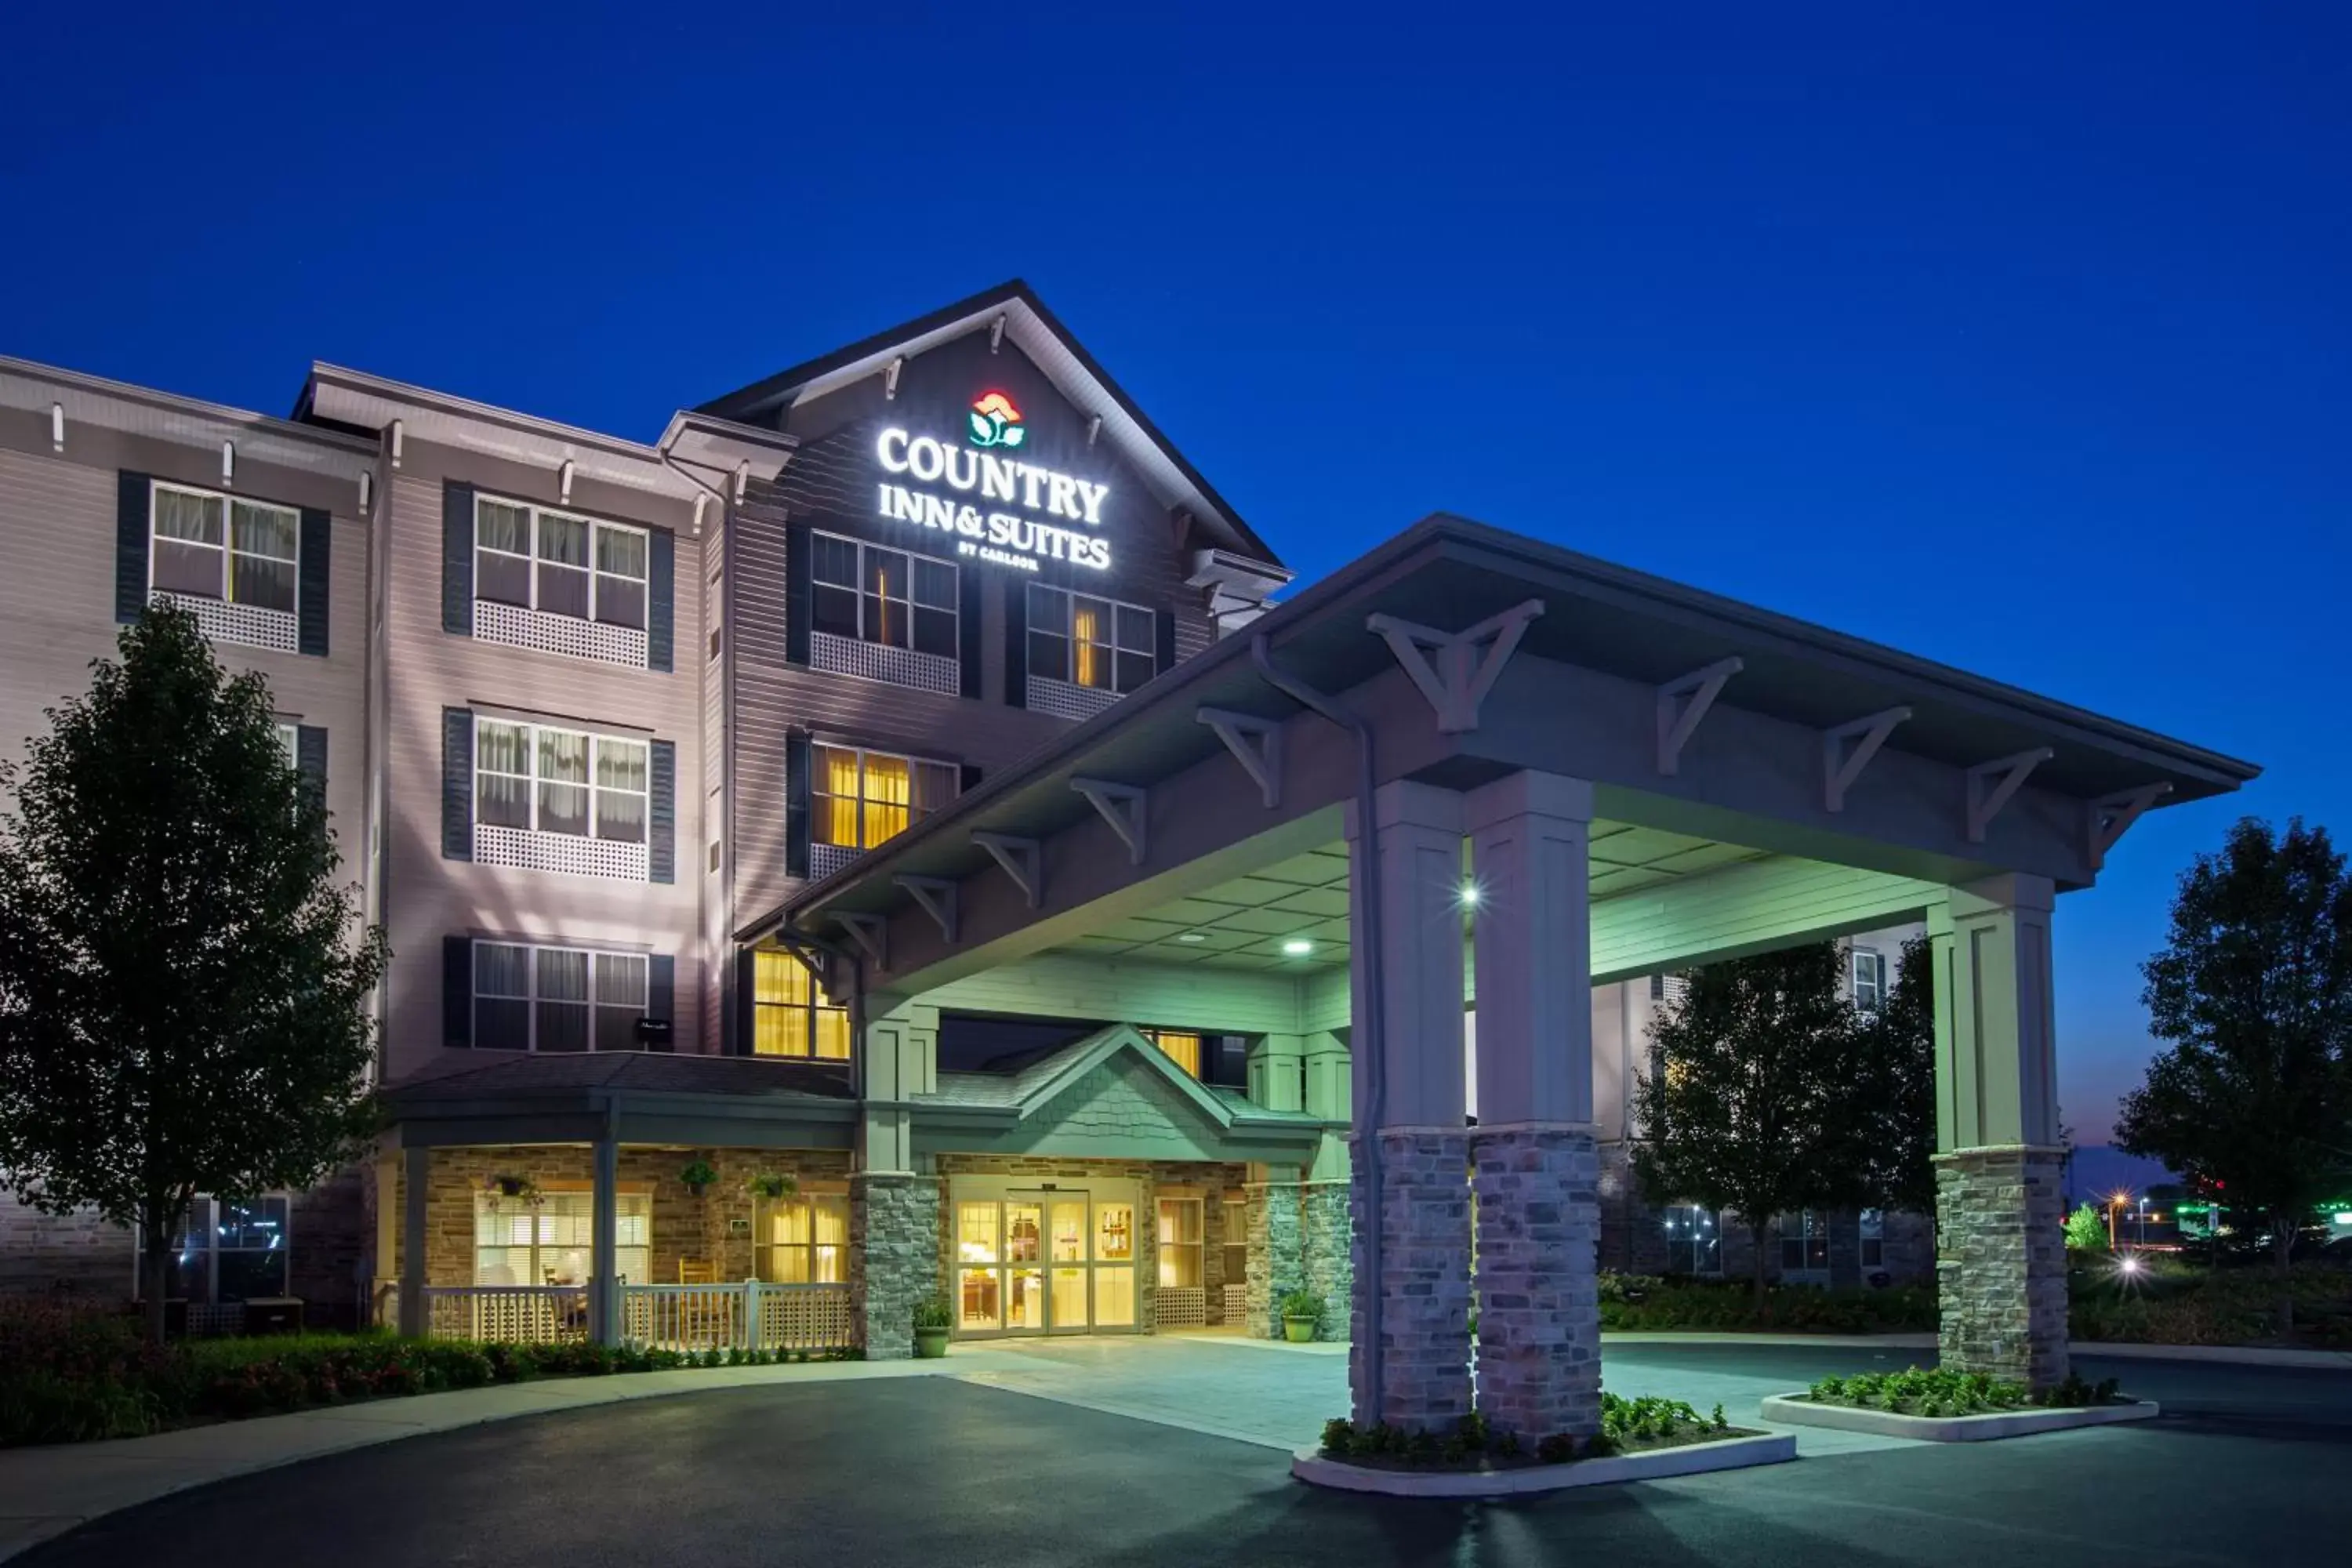 Facade/entrance, Property Building in Country Inn & Suites by Radisson, Portage, IN